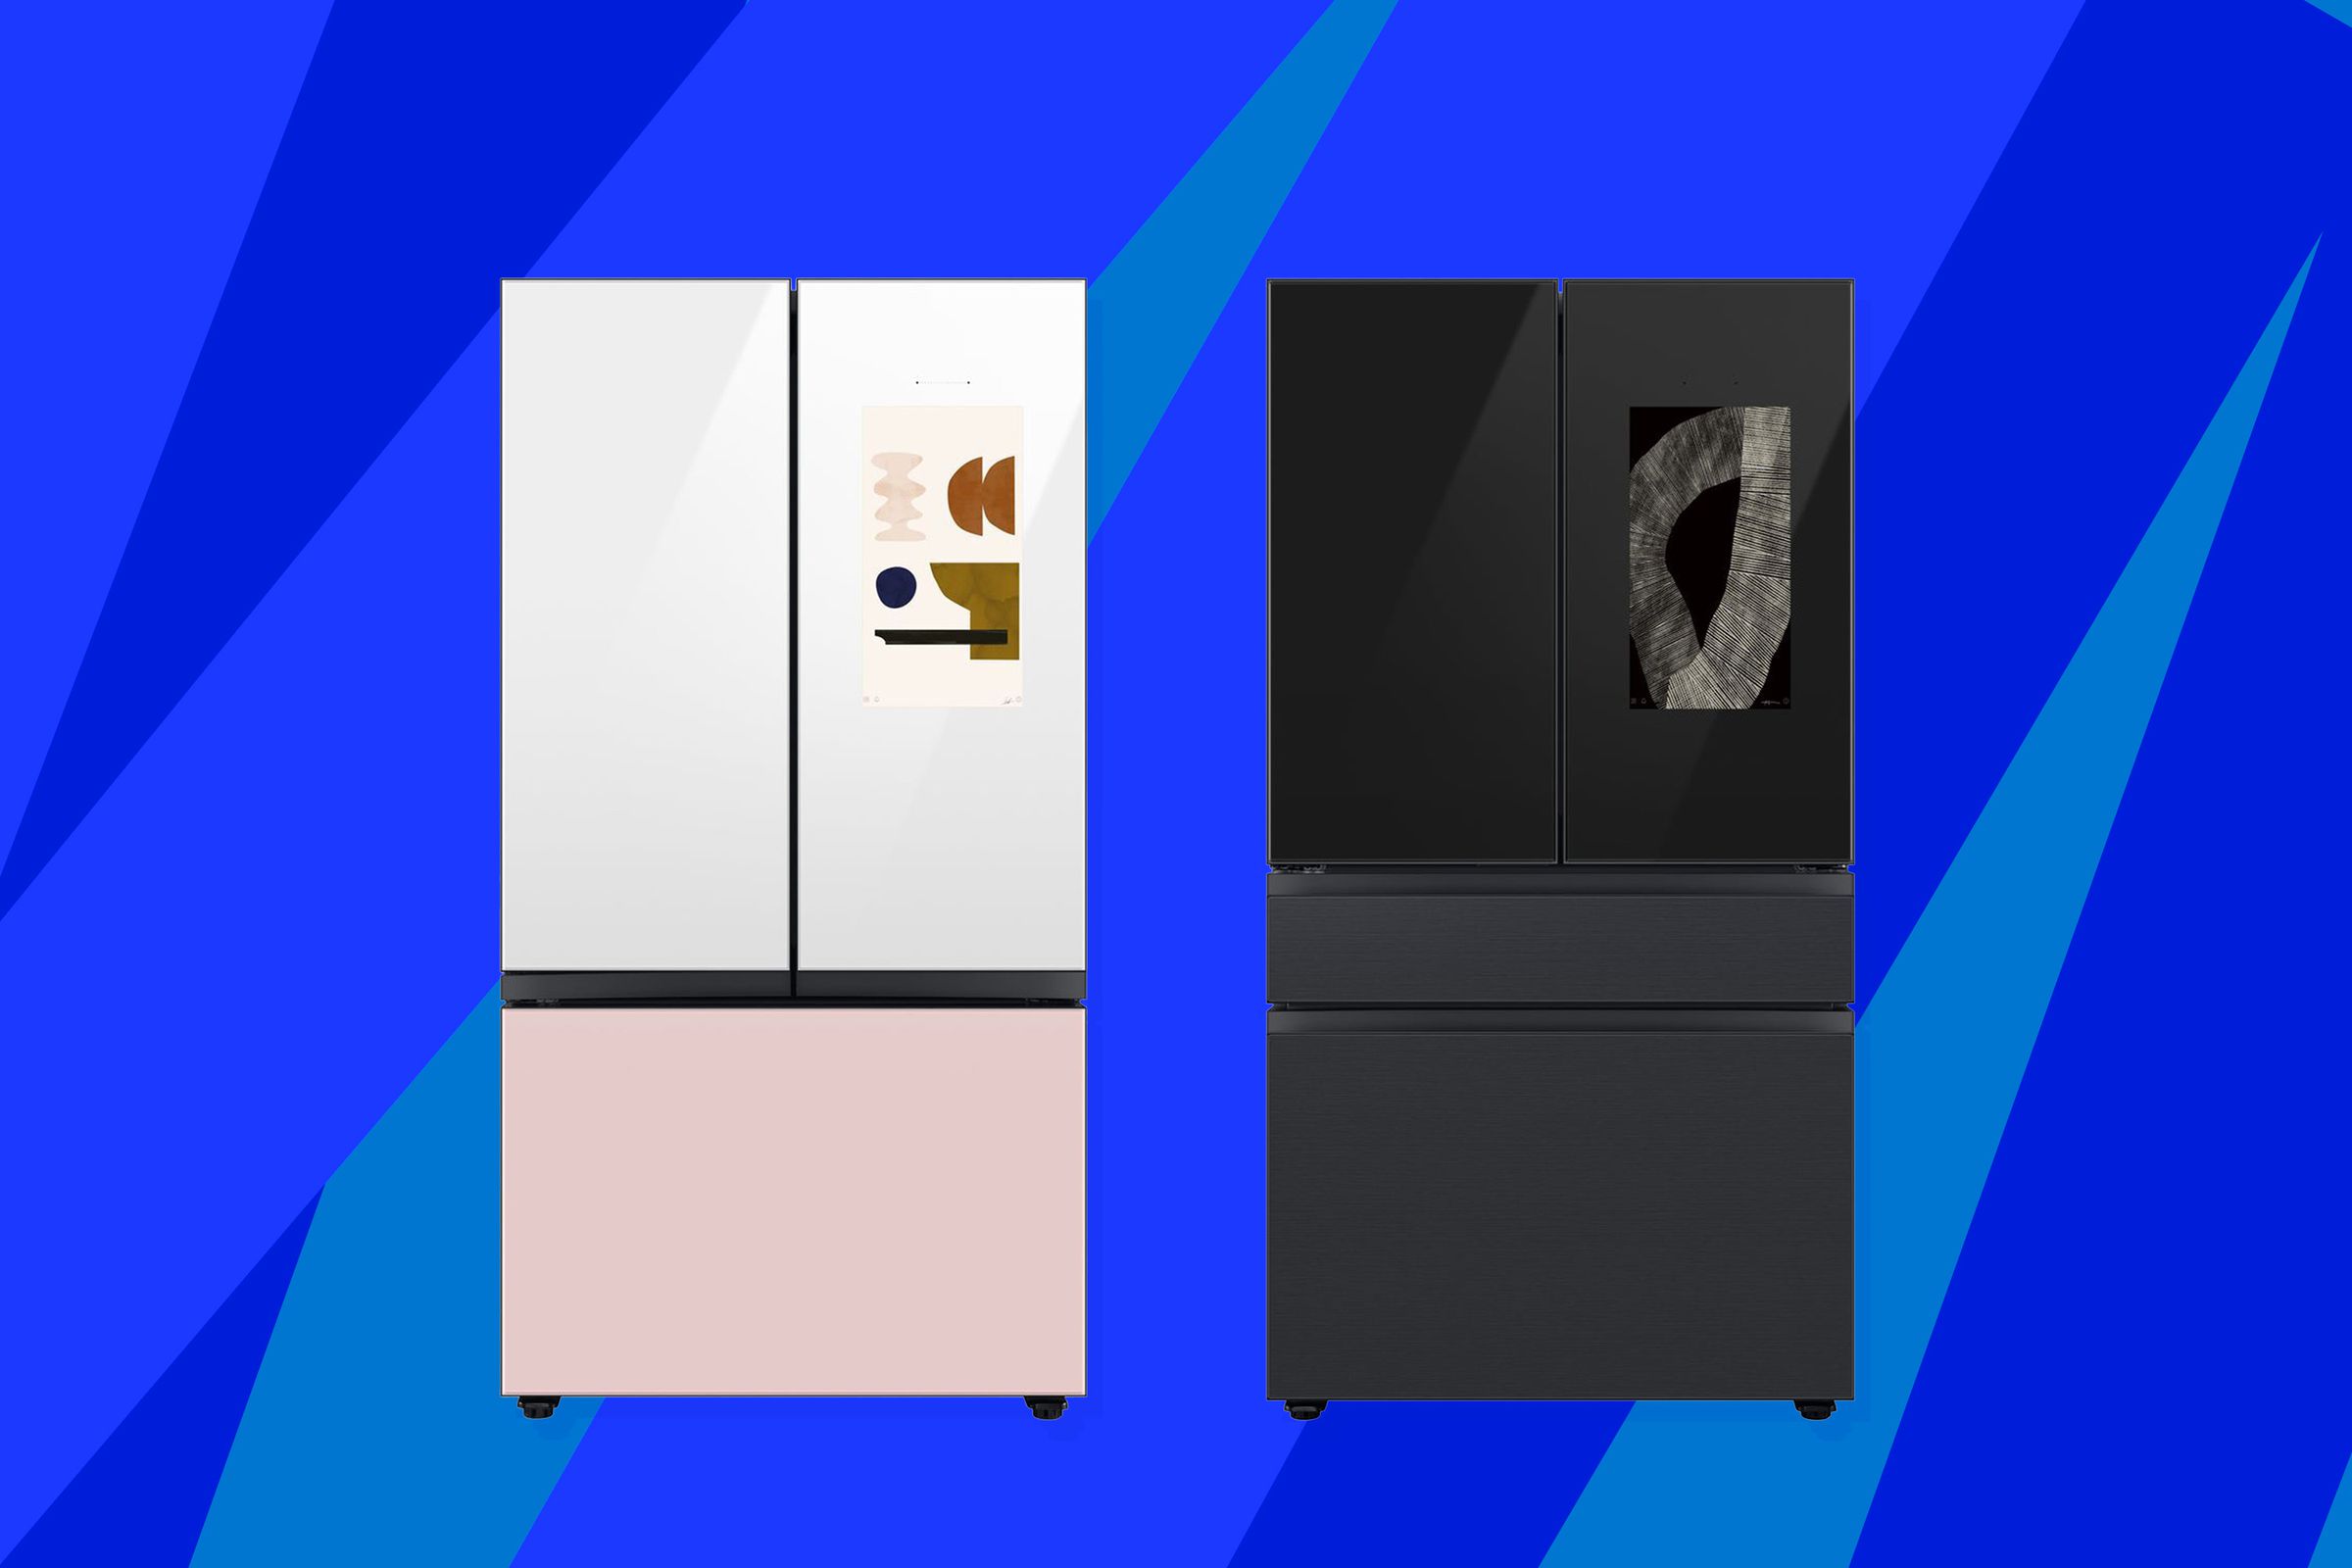 An update to Samsung’s Family Hub smart fridge brings an art mode and live TV through the Samsung TV Plus streaming service.